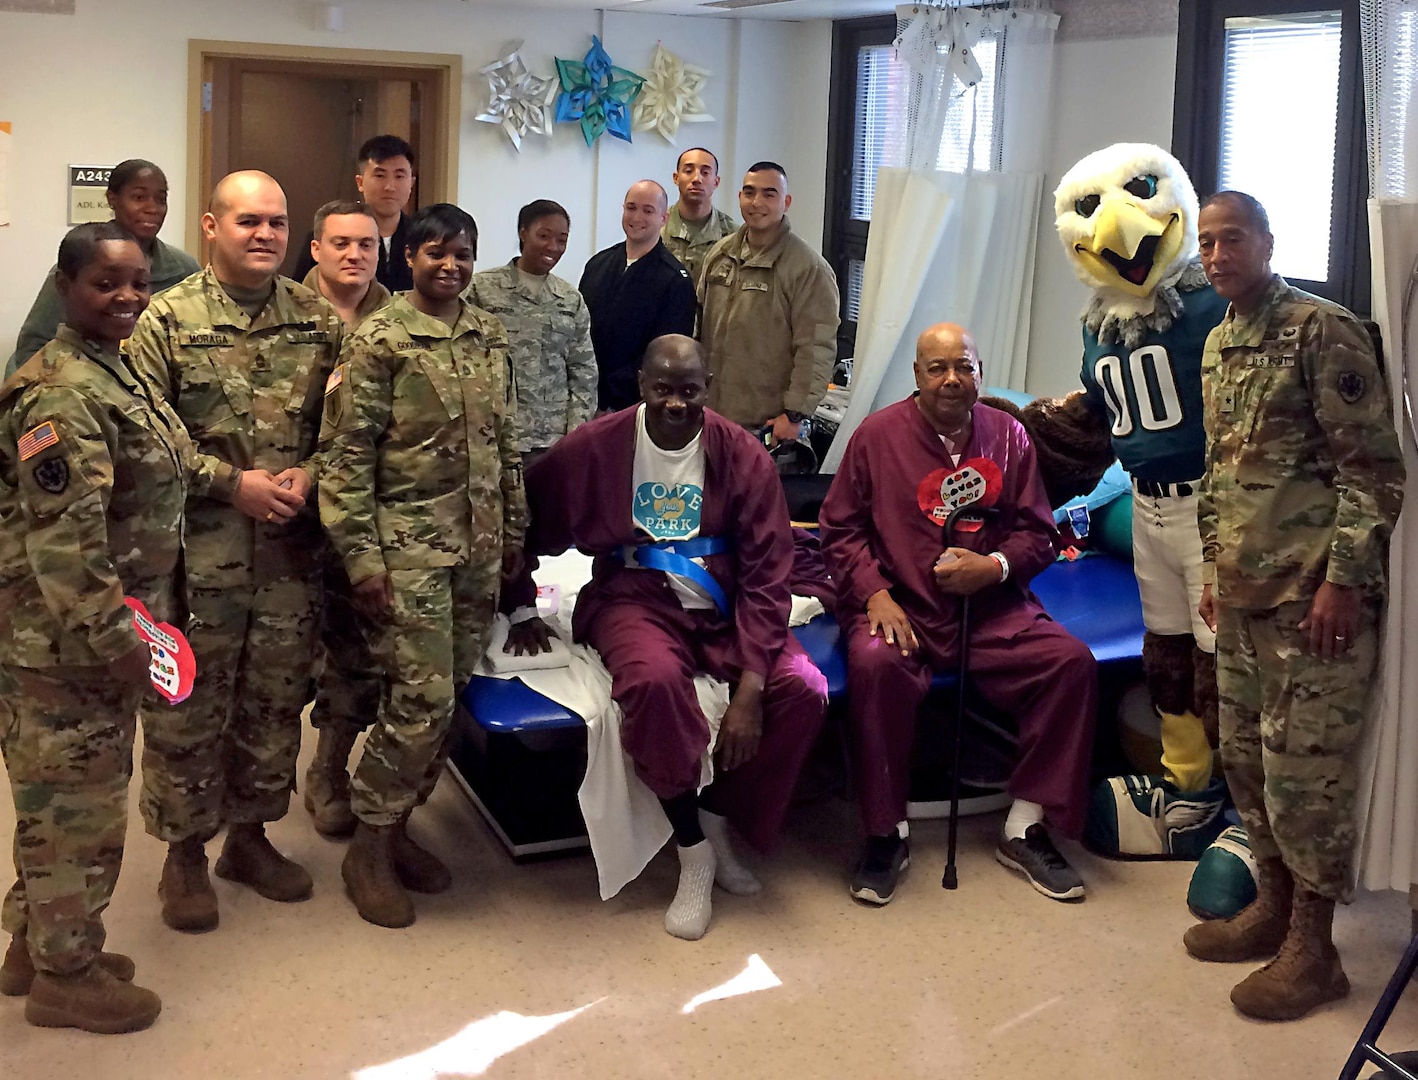 Soldiers, sailors and airmen assigned to DLA Troop Support posed for a picture with the Philadelphia Eagles’ mascot “Swoop” and two veteran patients at the Michael J. Crescenz Veteran Medical Center in Philadelphia Feb. 17 as part of the 40th annual National Salute to Veterans Patient Week.